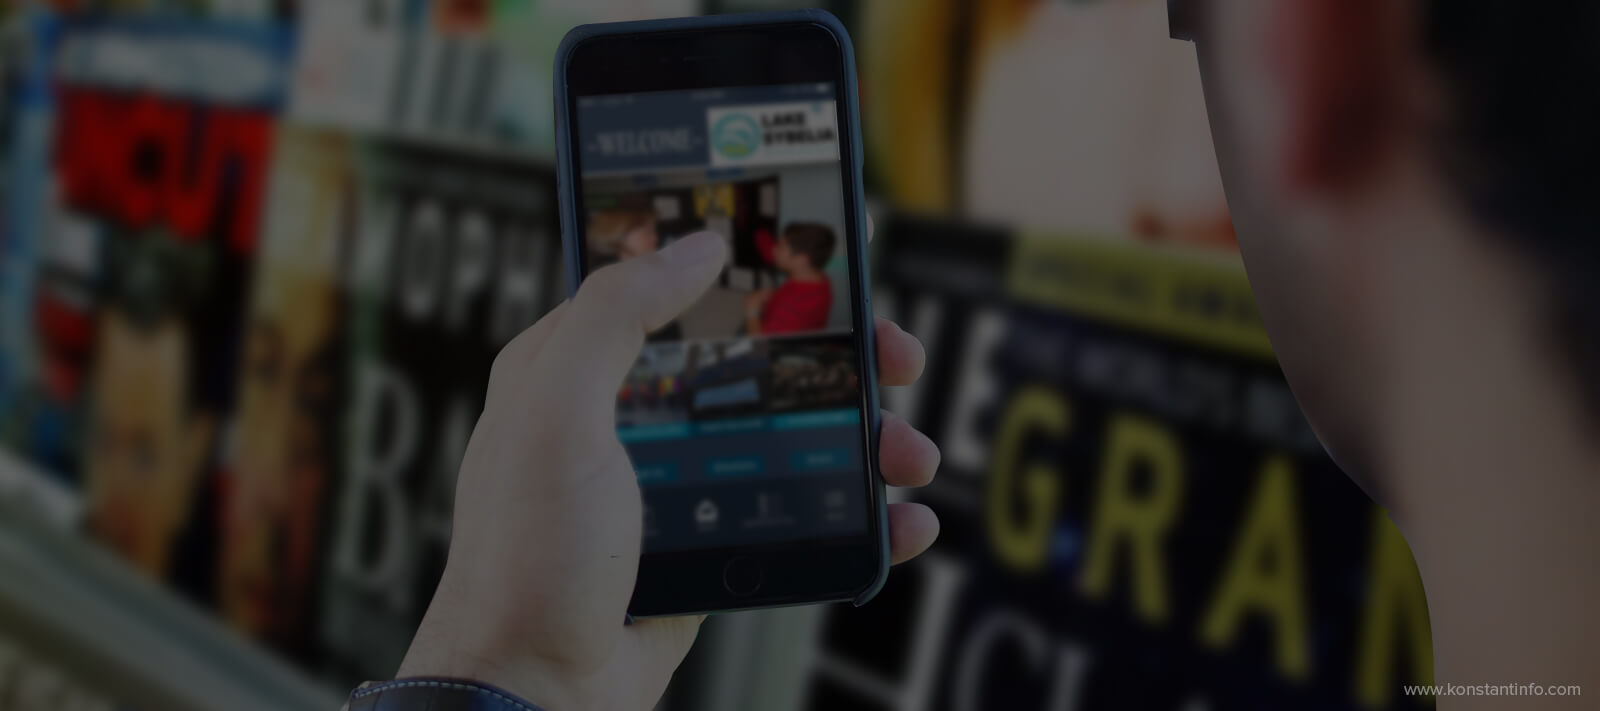 Why Do You Need to Create a Mobile App for Your Magazine?